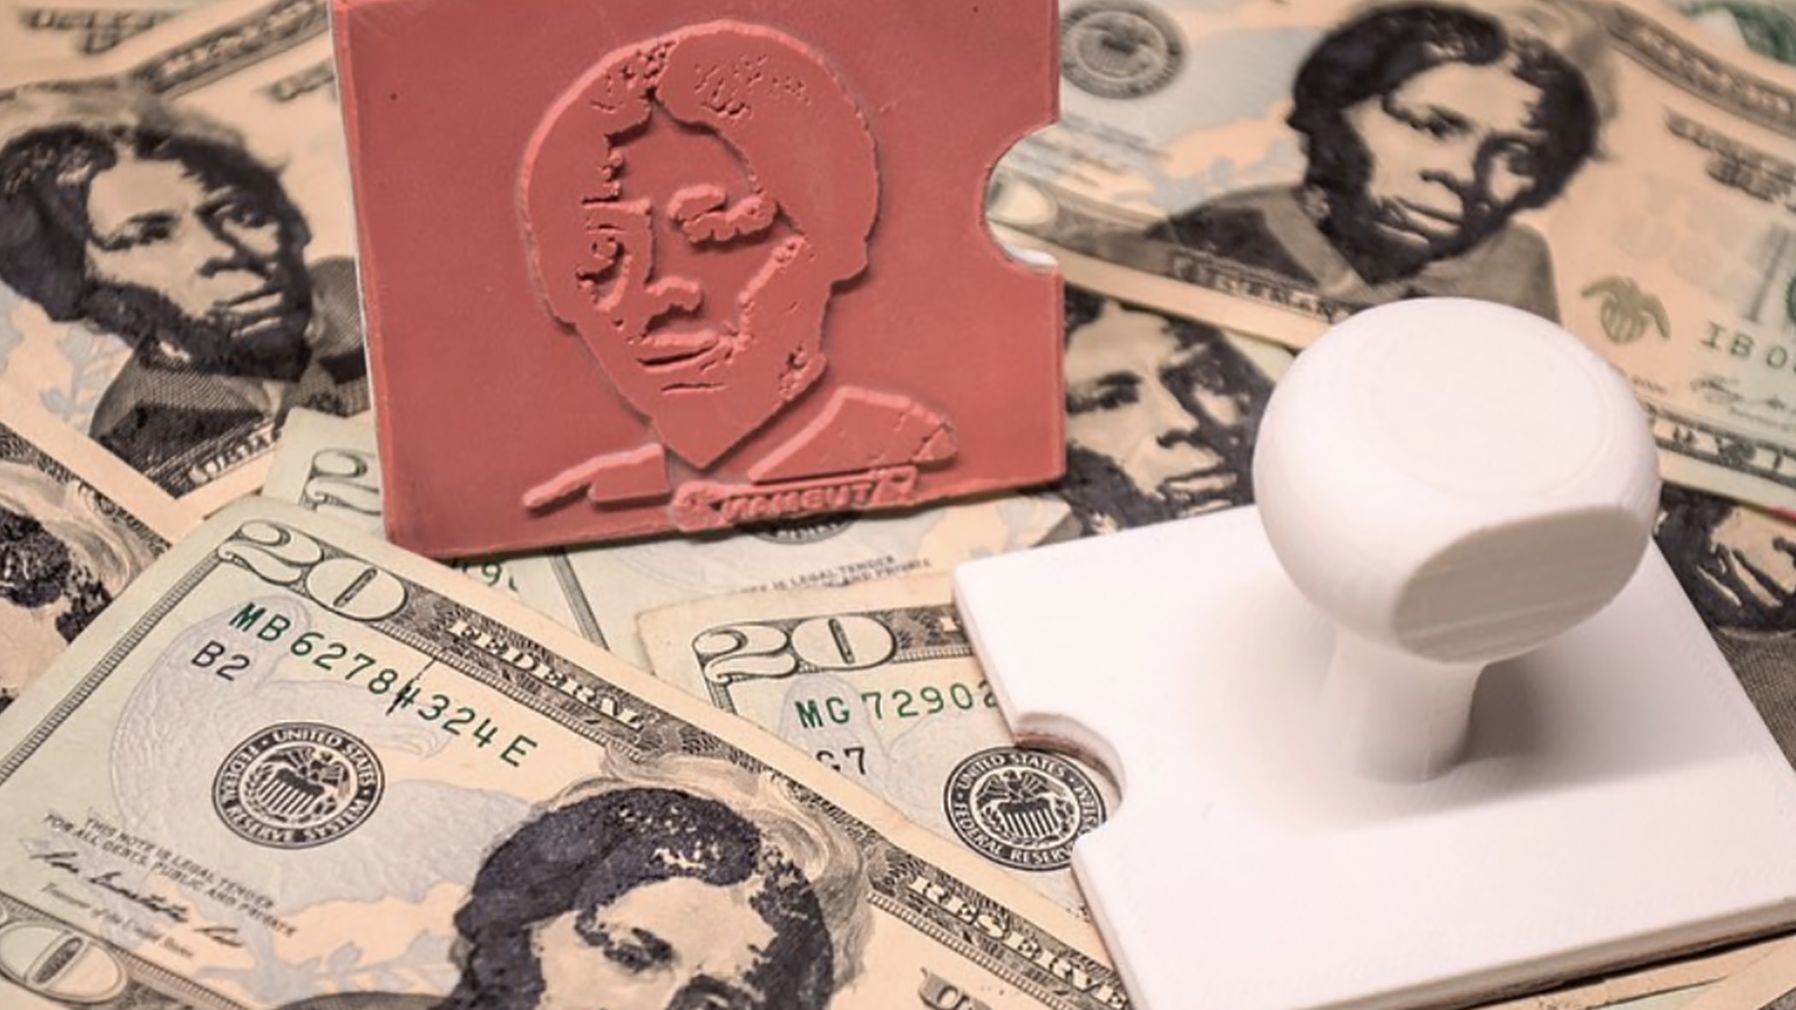 This 3-D rubber stamp allows users to superimpose Tubman's image over President Andrew Jackson's portrait.